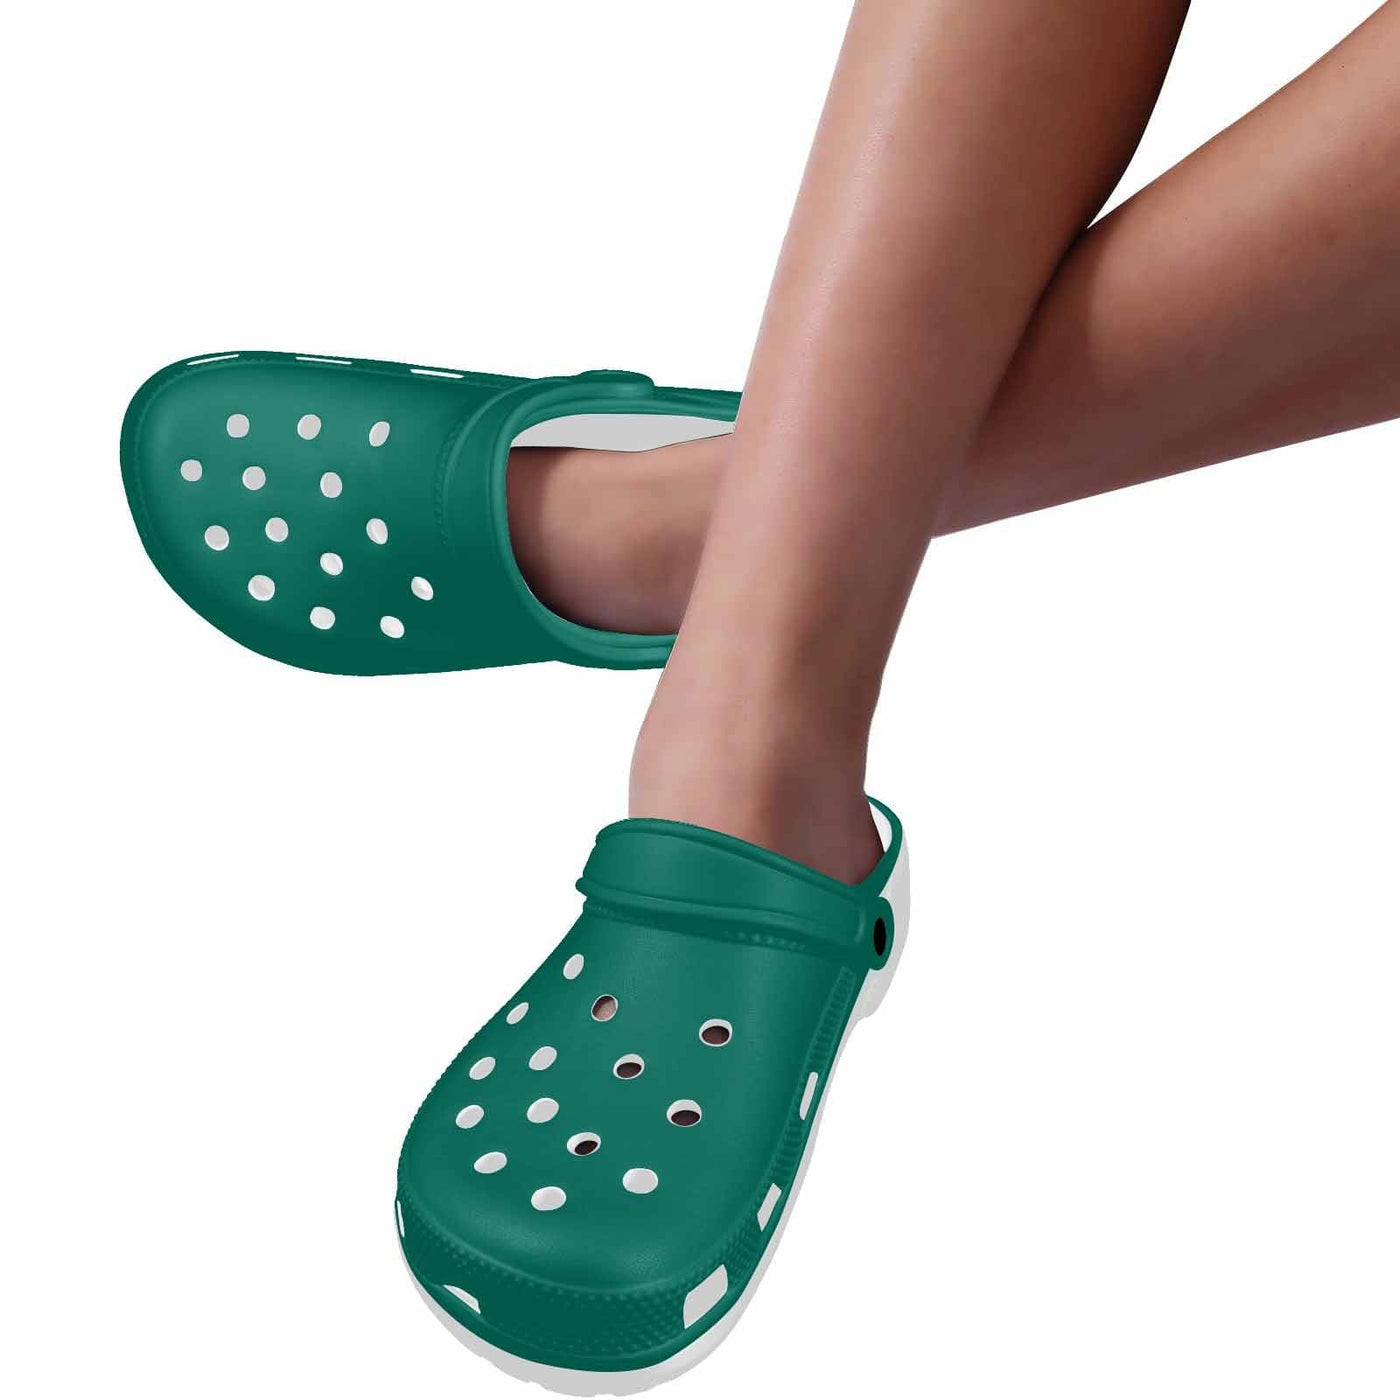 Teal Green Adult Clogs - Unisex | Clogs | Adults